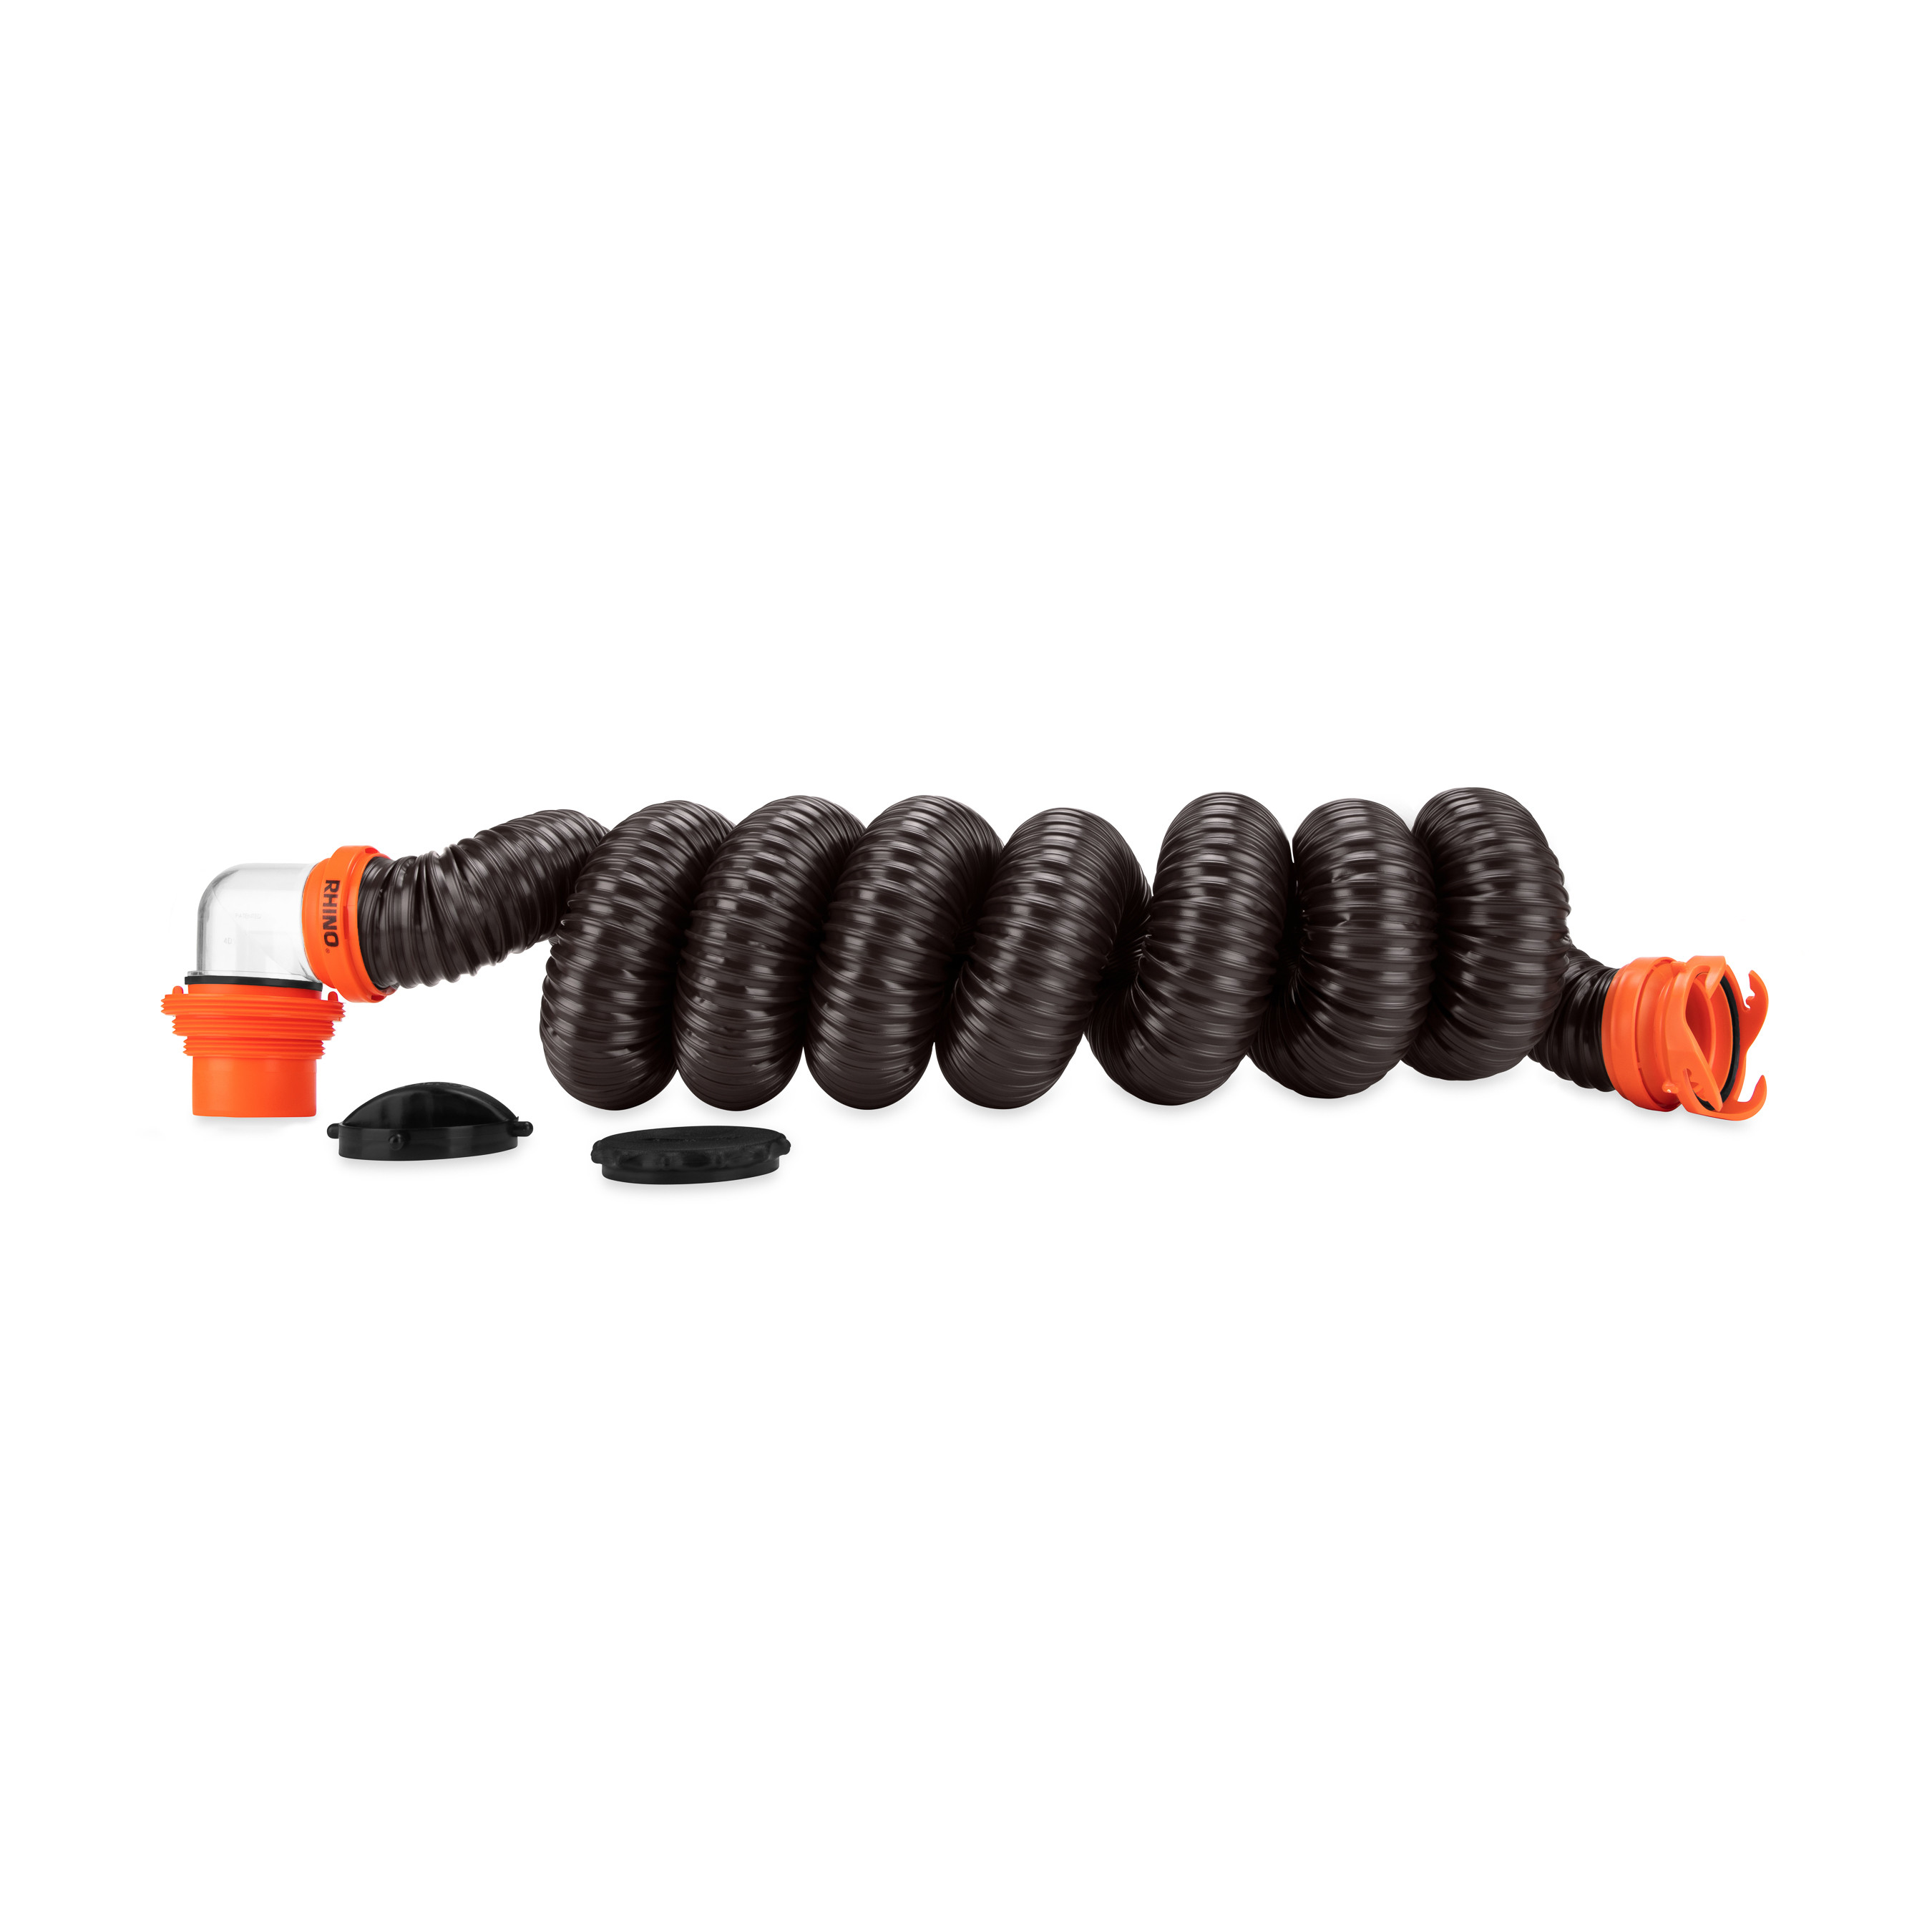 Camco RhinoFLEX 15-Foot RV Sewer Hose Kit - Polyolefin, Multicolor (39761) - image 1 of 6